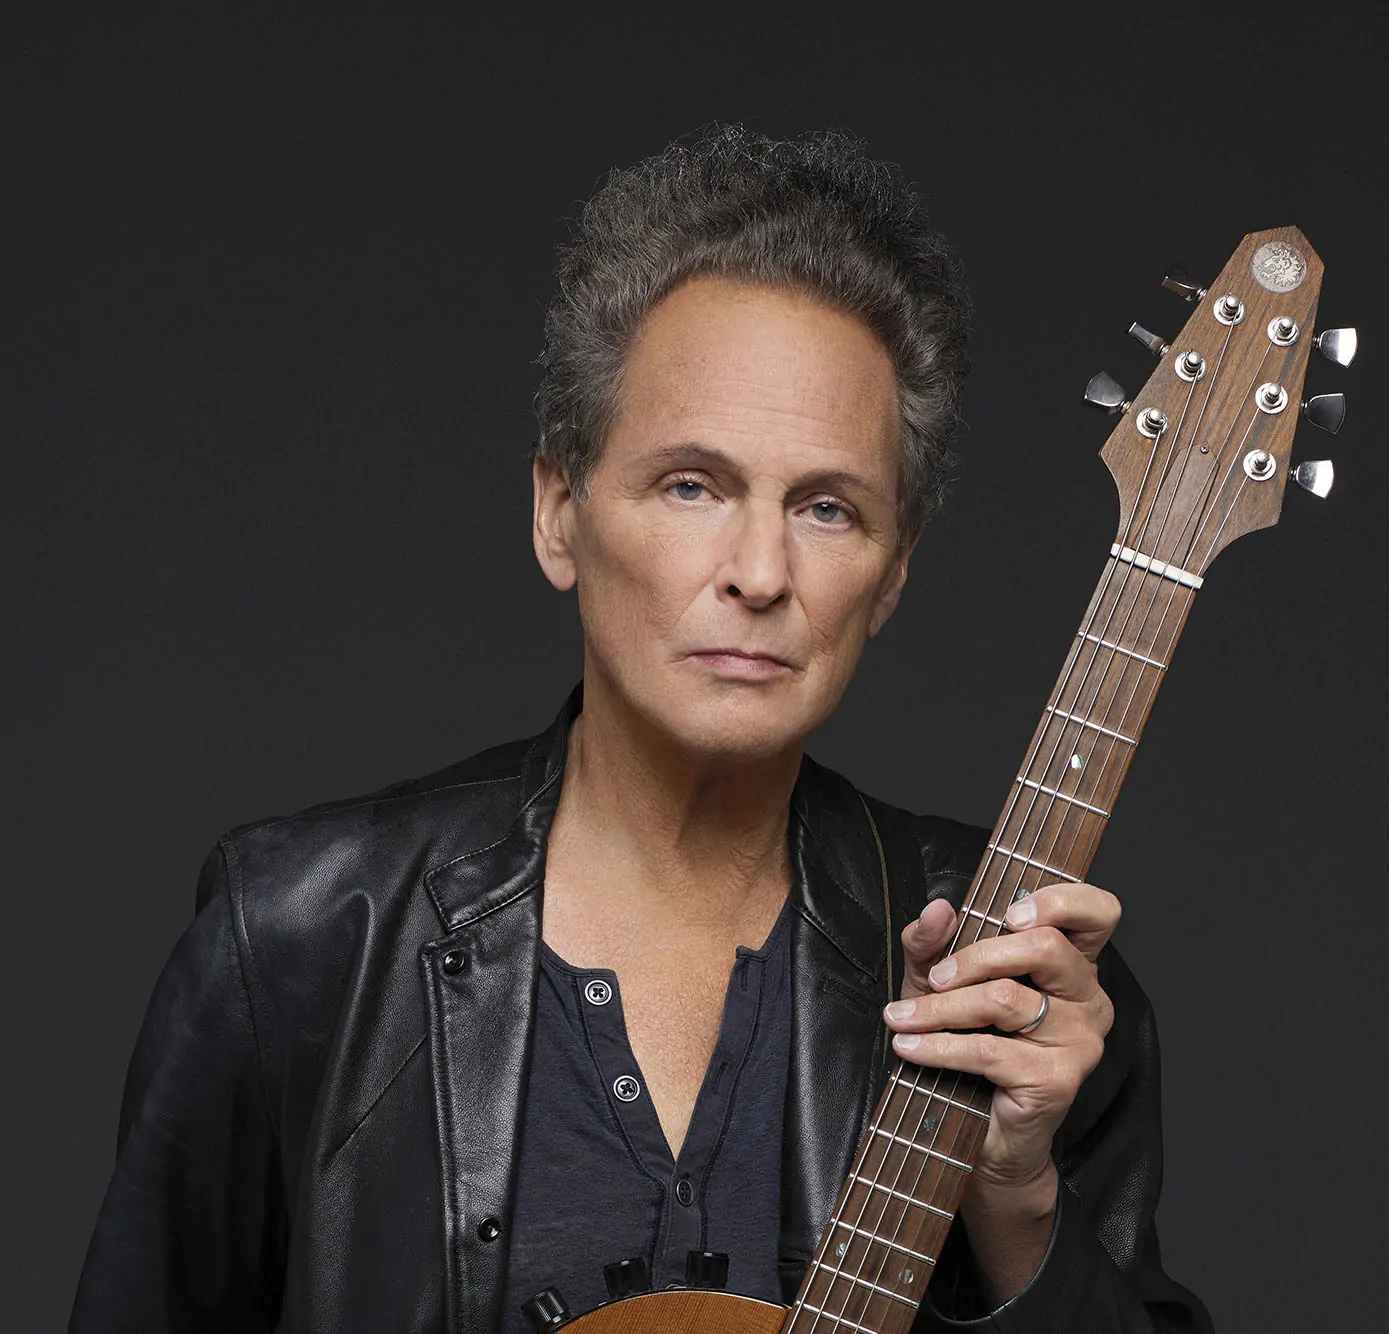 LINDSEY BUCKINGHAM releases ‘On The Wrong Side’ from his forthcoming self-titled solo record